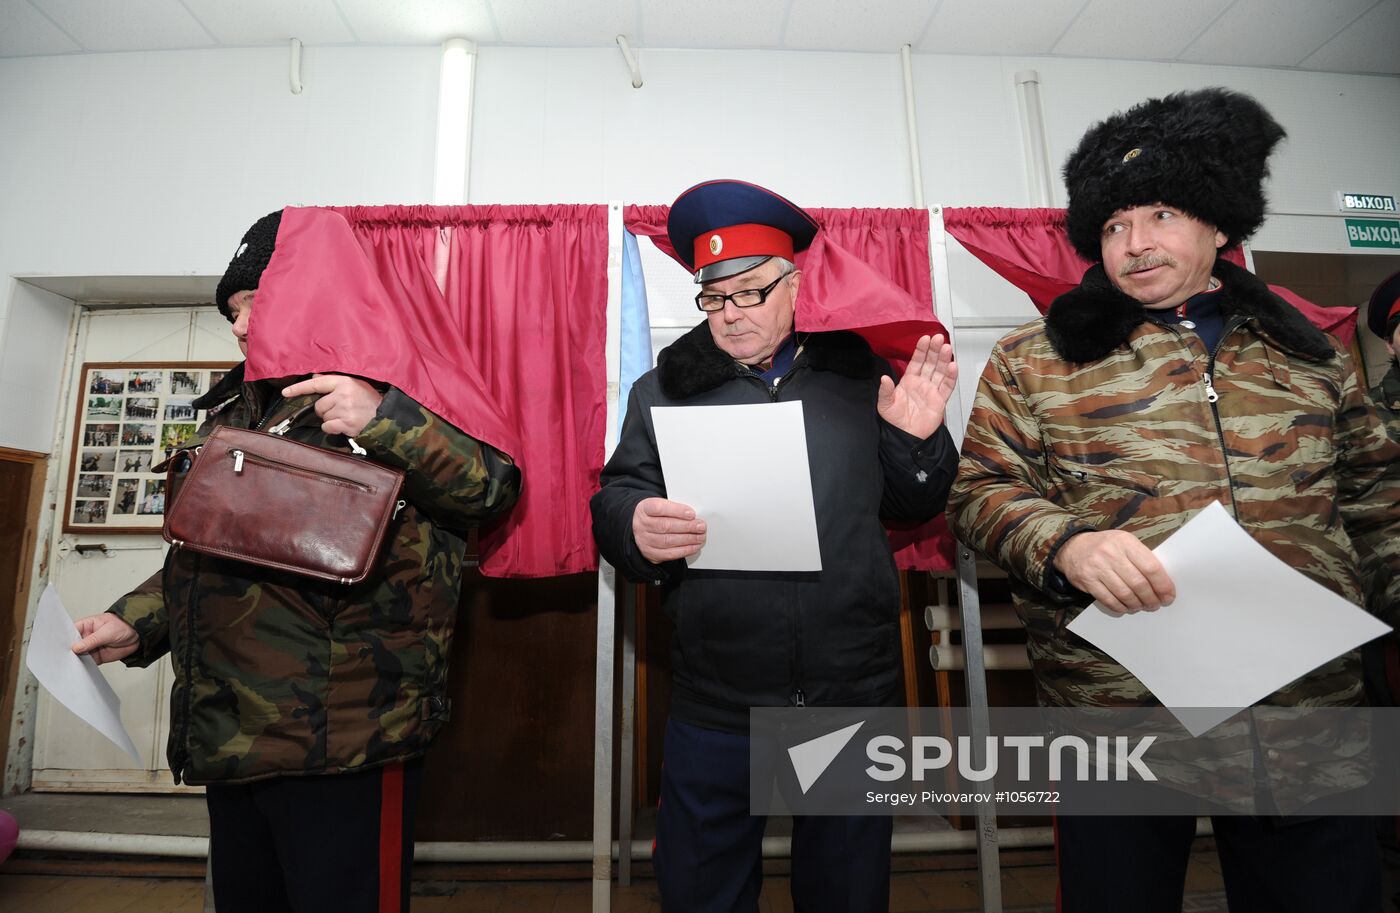 Russian presidential elections in the regions